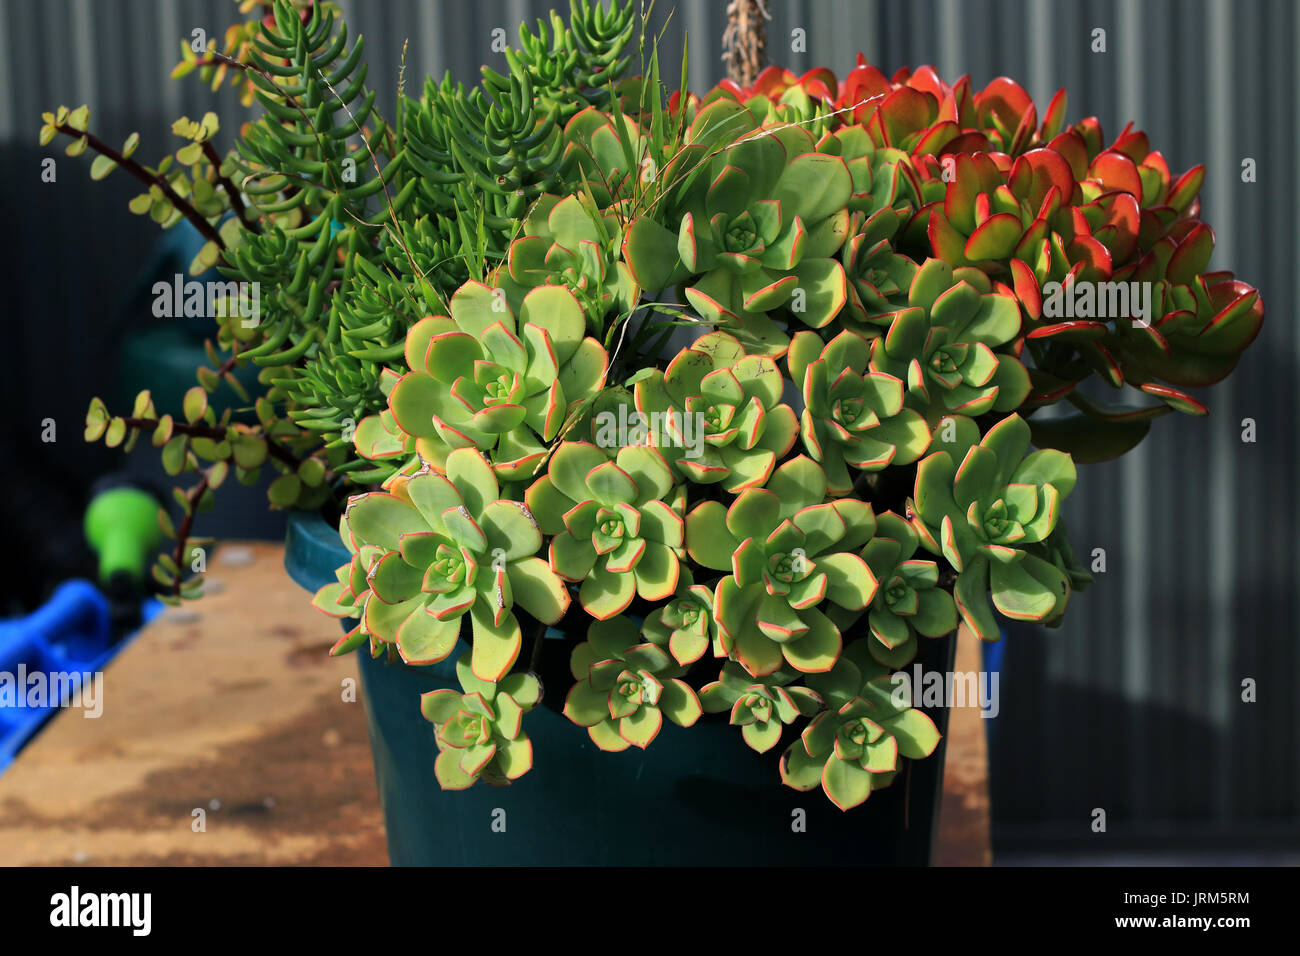 Mixed succulents such as  Aeonium haworthii and Jade plant which also known as Money plant growing in a pot Stock Photo